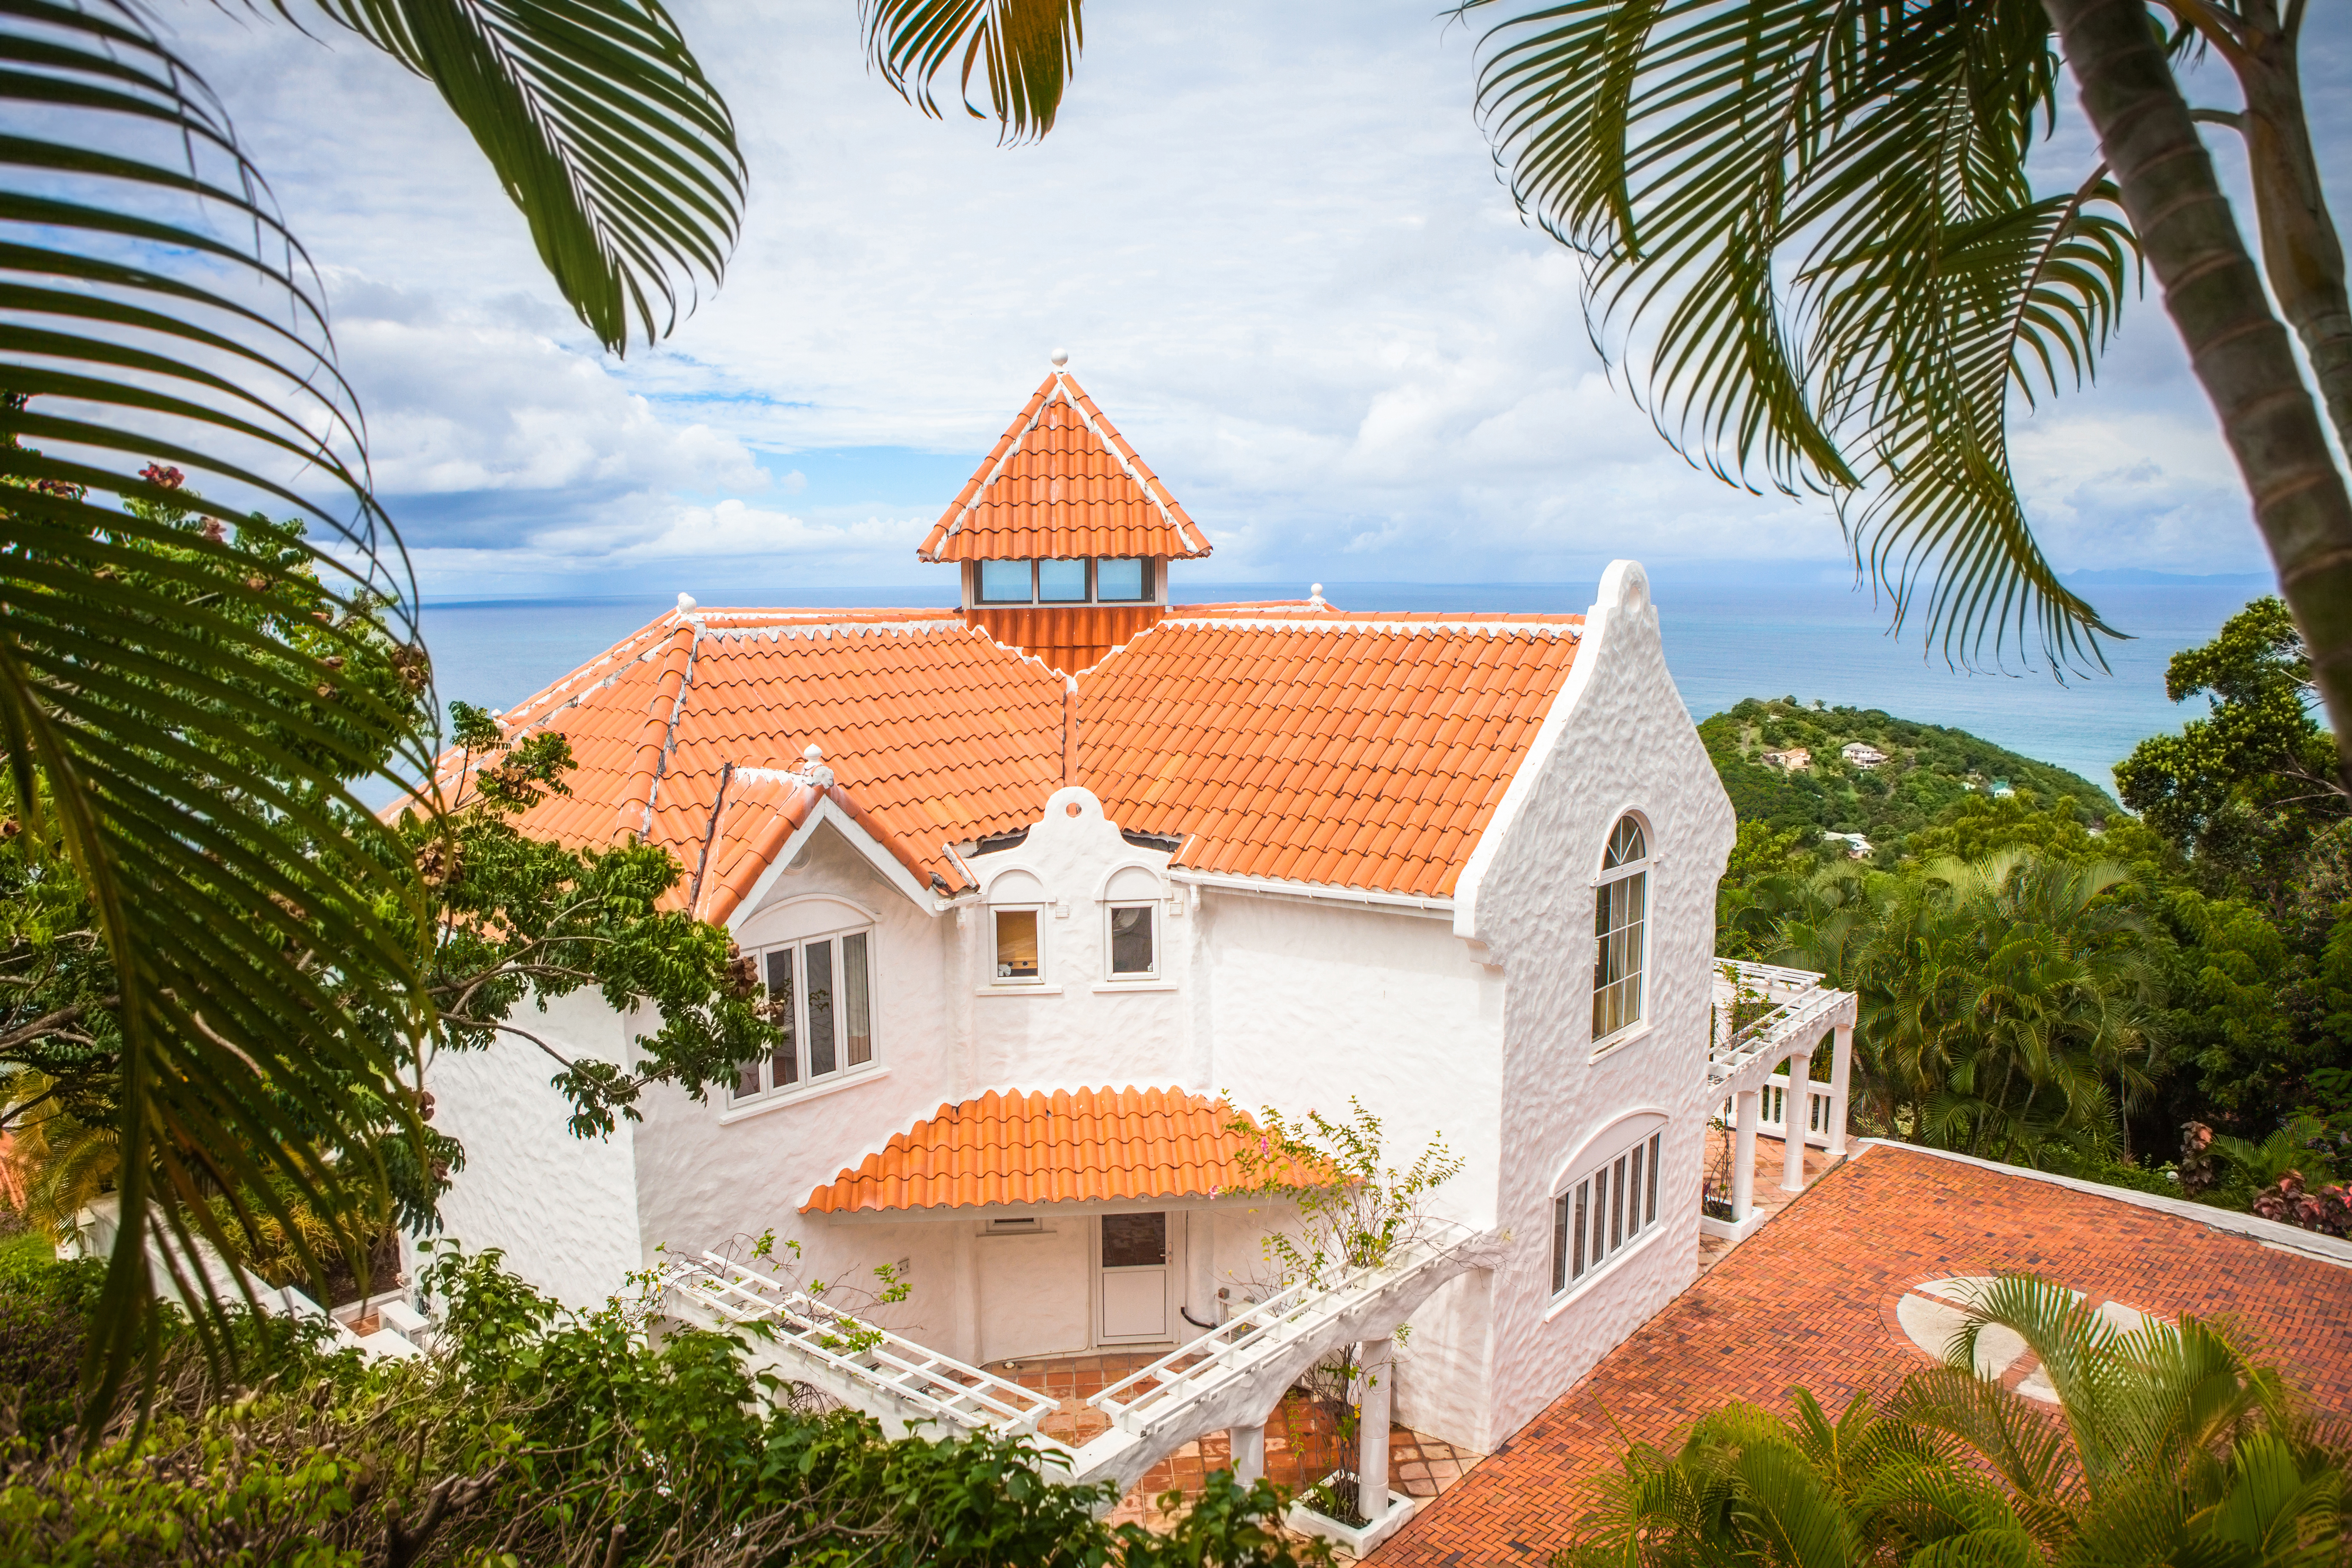 Villa on the Caribbean coast, through the purchase of which you can obtain the citizenship of Saint Lucia by investment